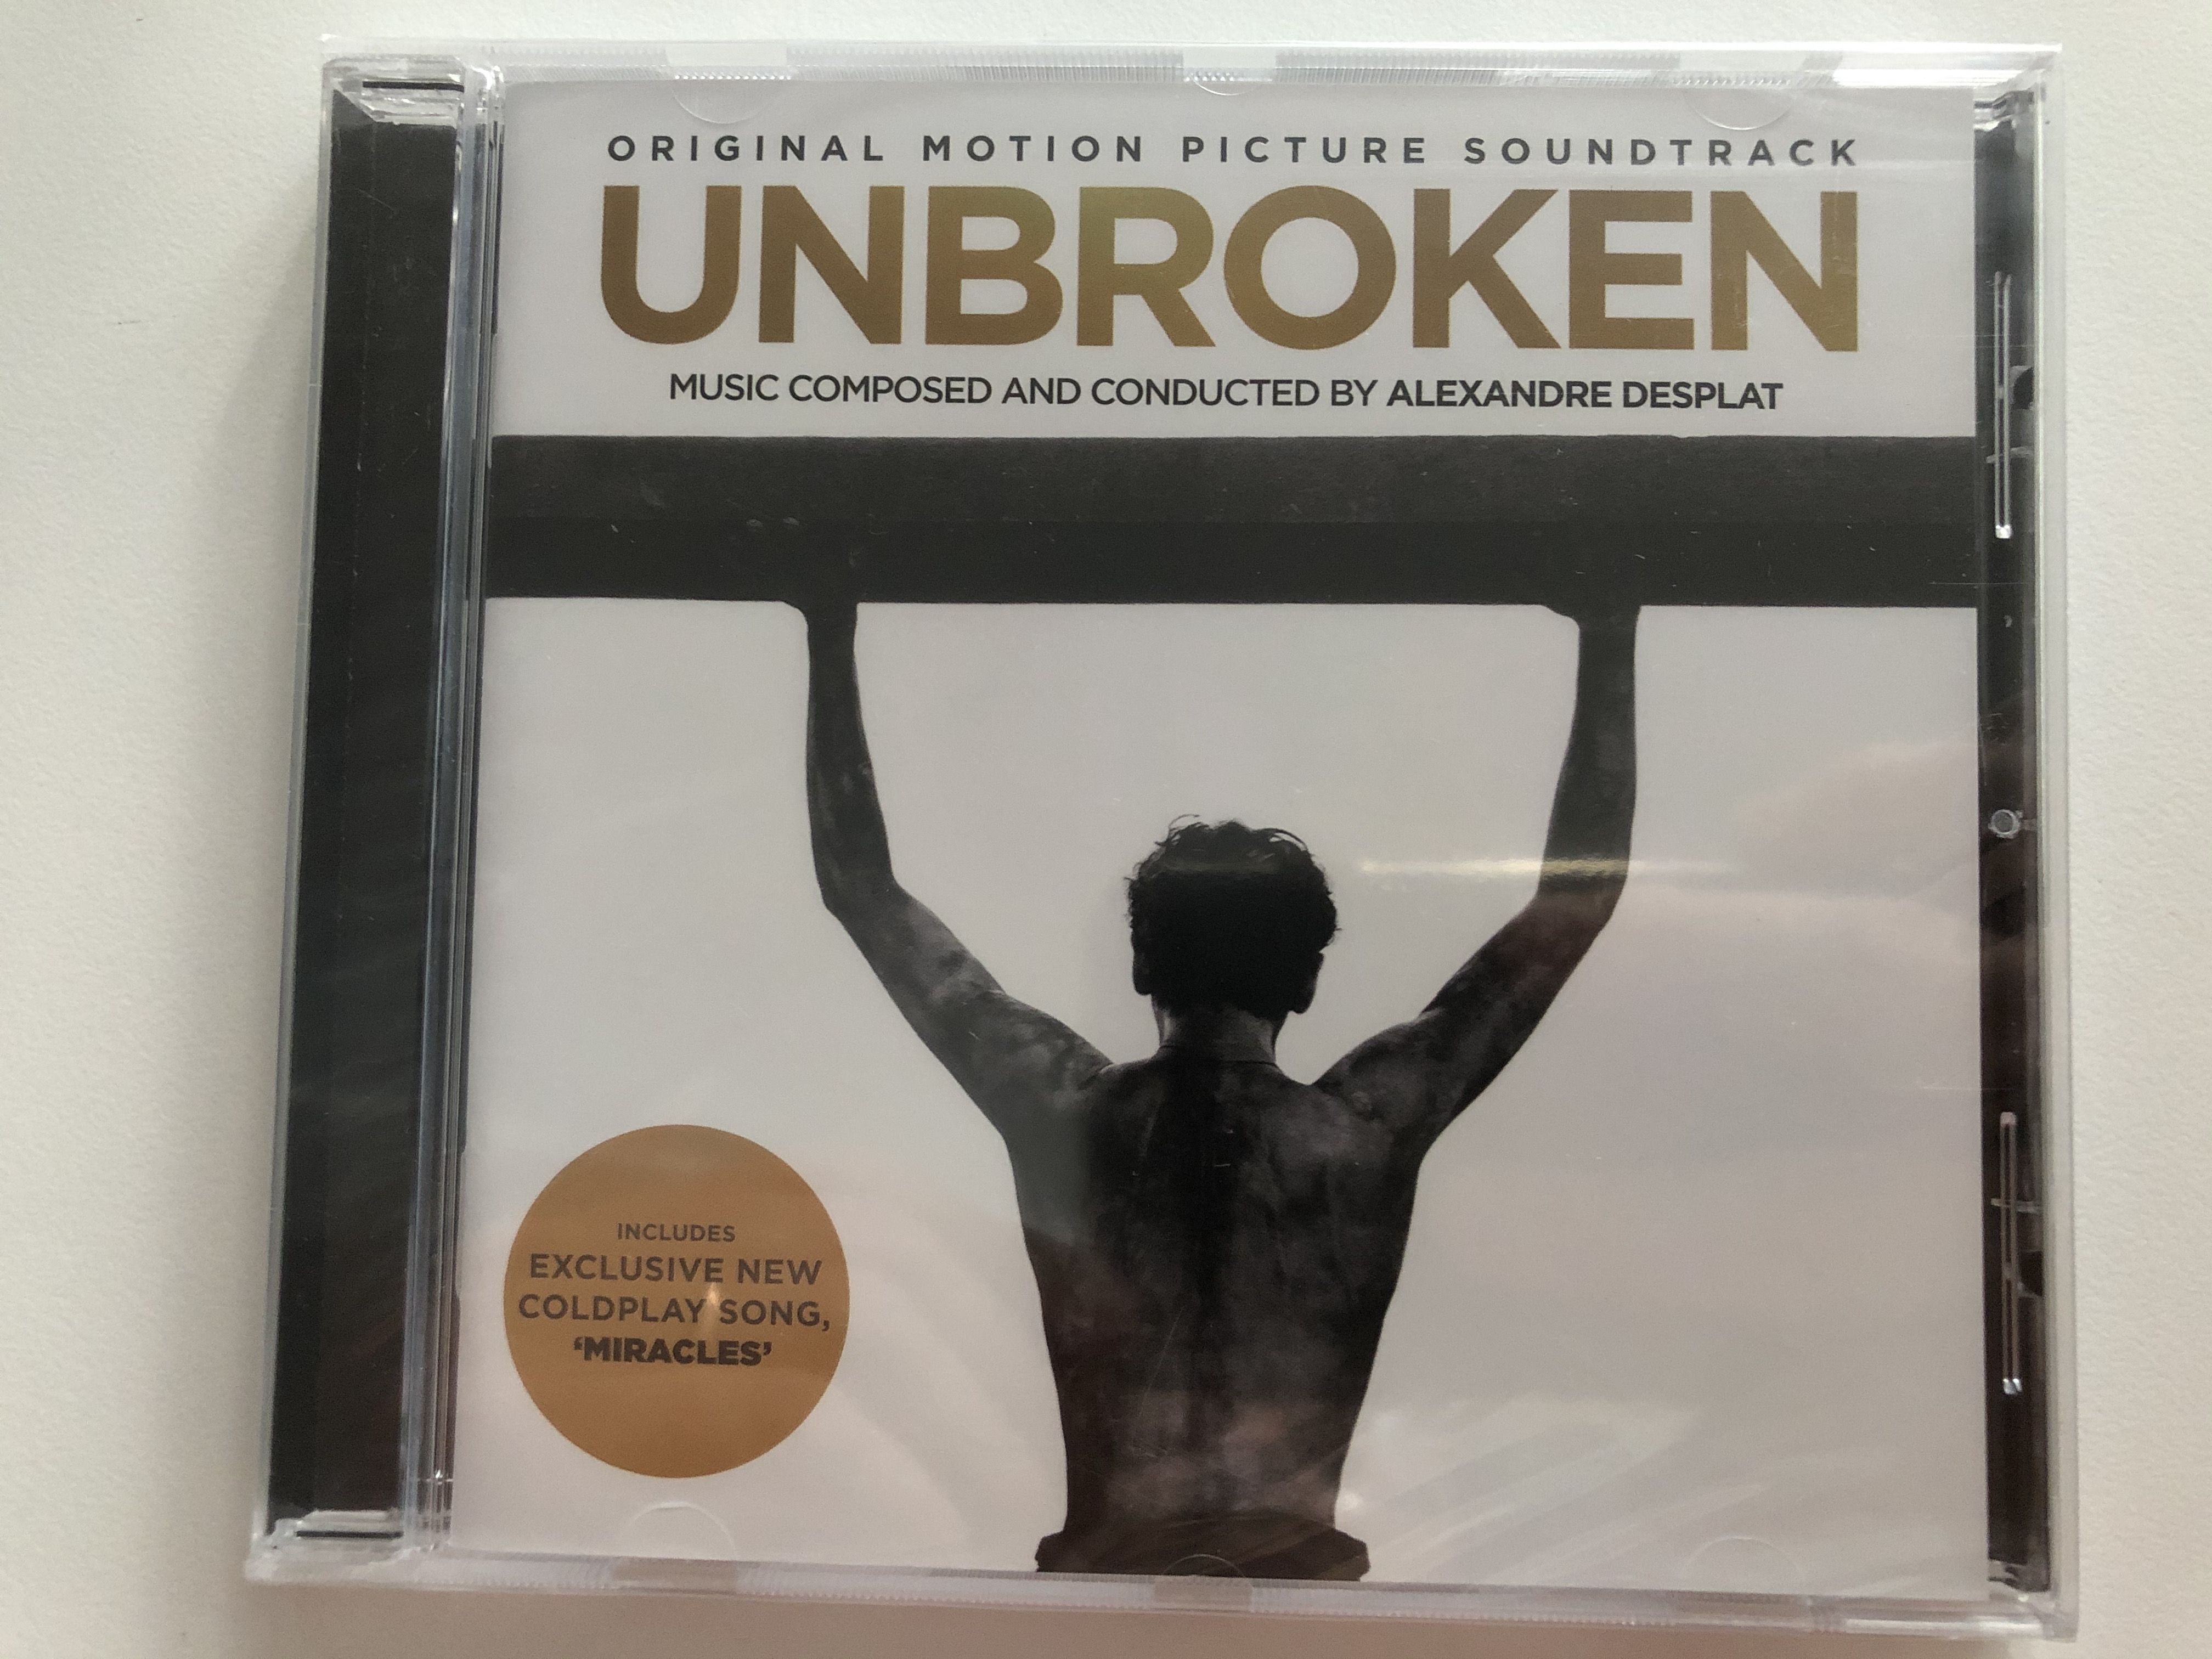 unbroken-original-motion-picture-soundtrack-music-composed-and-conducted-by-alexandre-desplat-includes-exclusive-new-coldplay-song-miracles-parlophone-audio-cd-2014-825646173341-1-.jpg